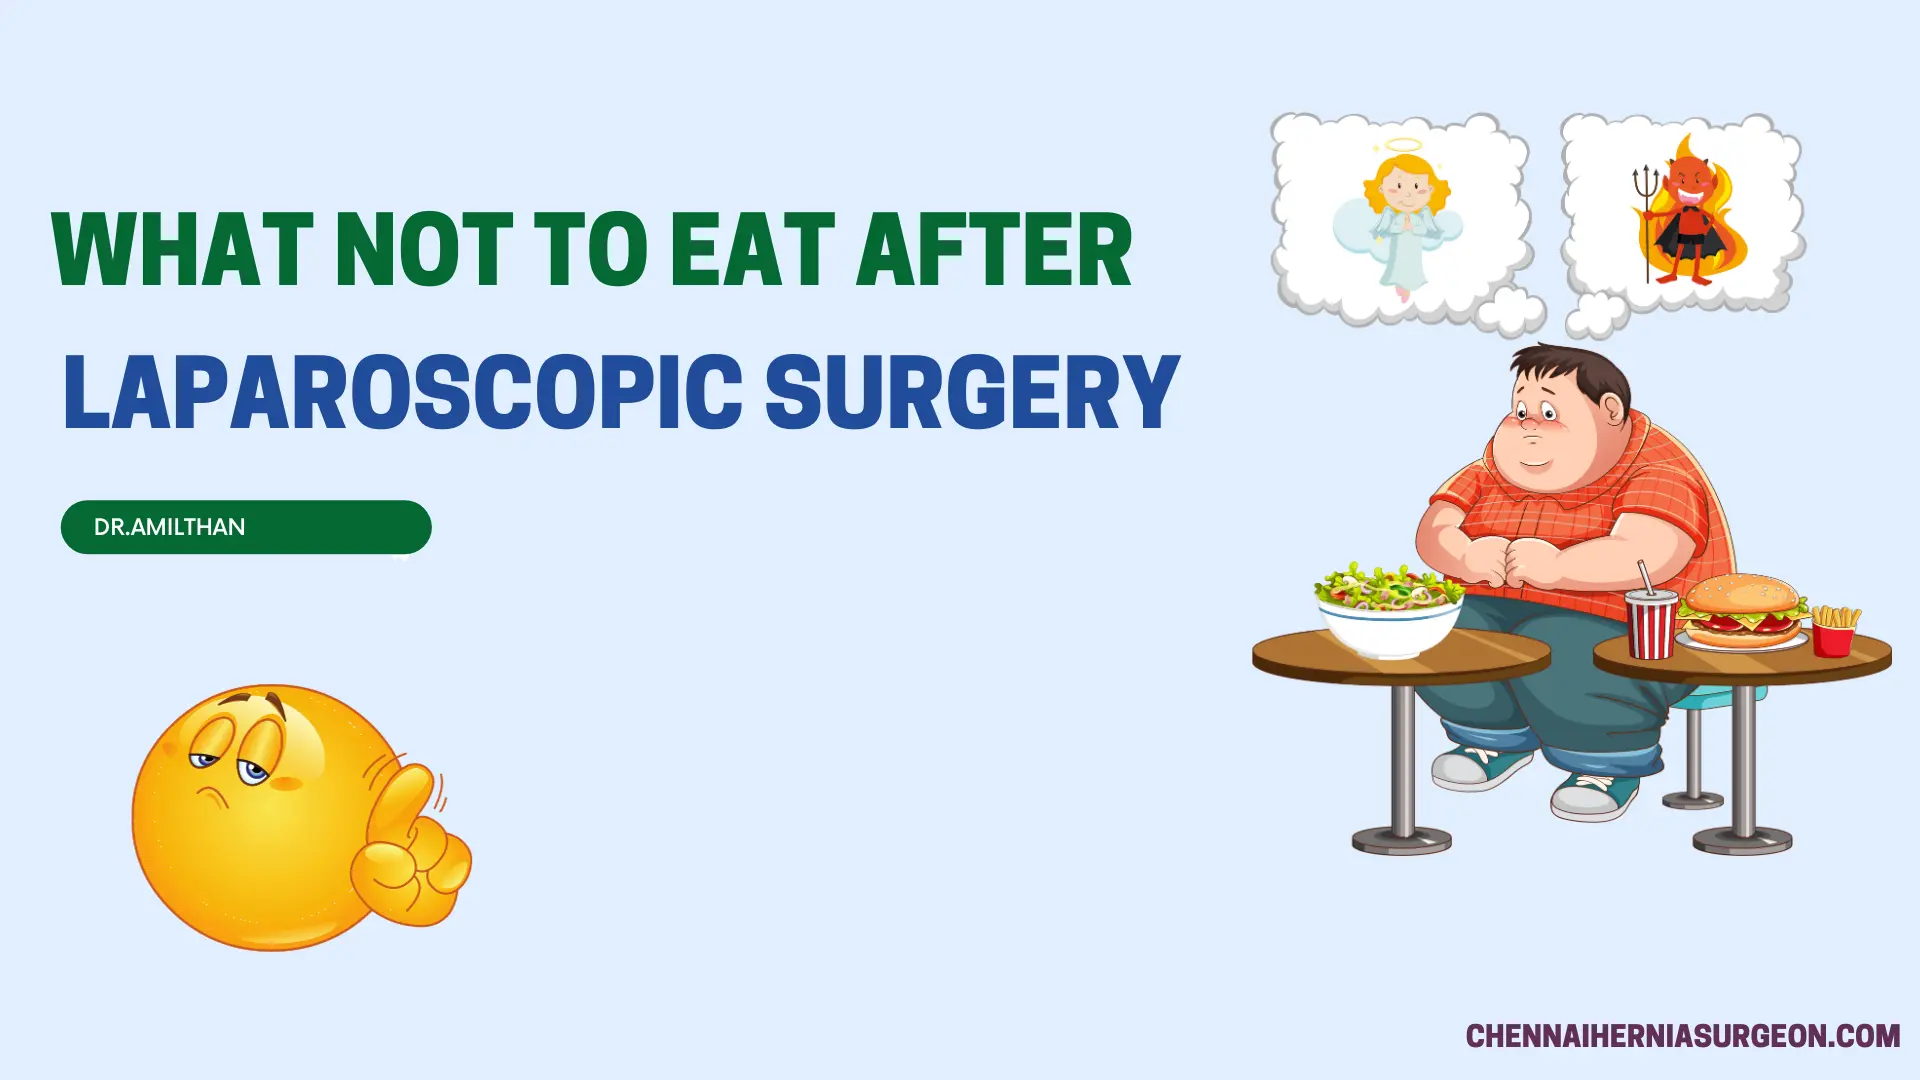 What Not To Eat After Laparoscopic Surgery